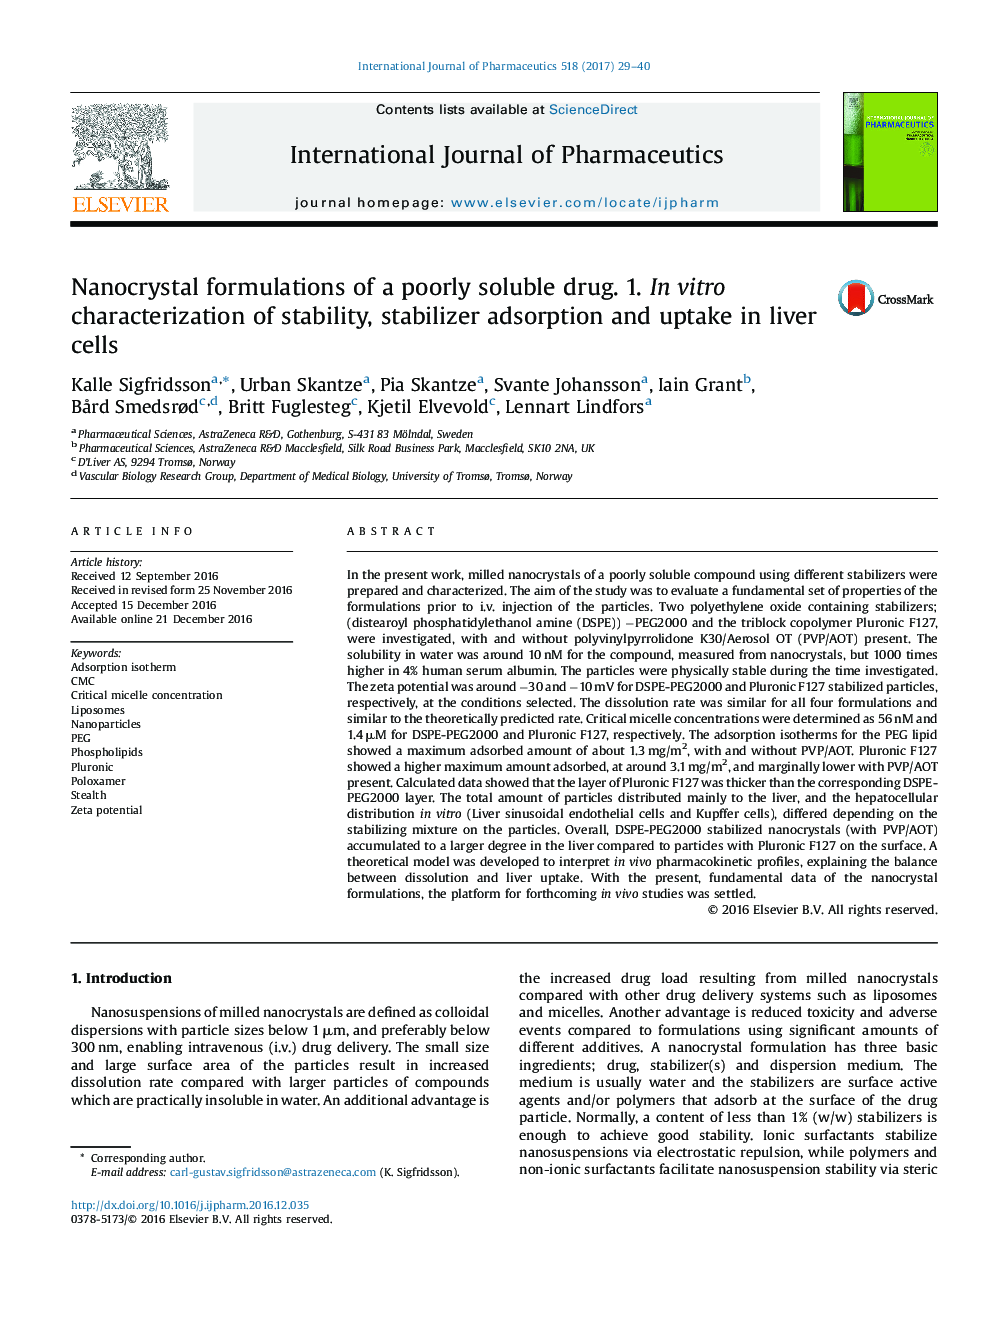 Nanocrystal formulations of a poorly soluble drug. 1. In vitro characterization of stability, stabilizer adsorption and uptake in liver cells